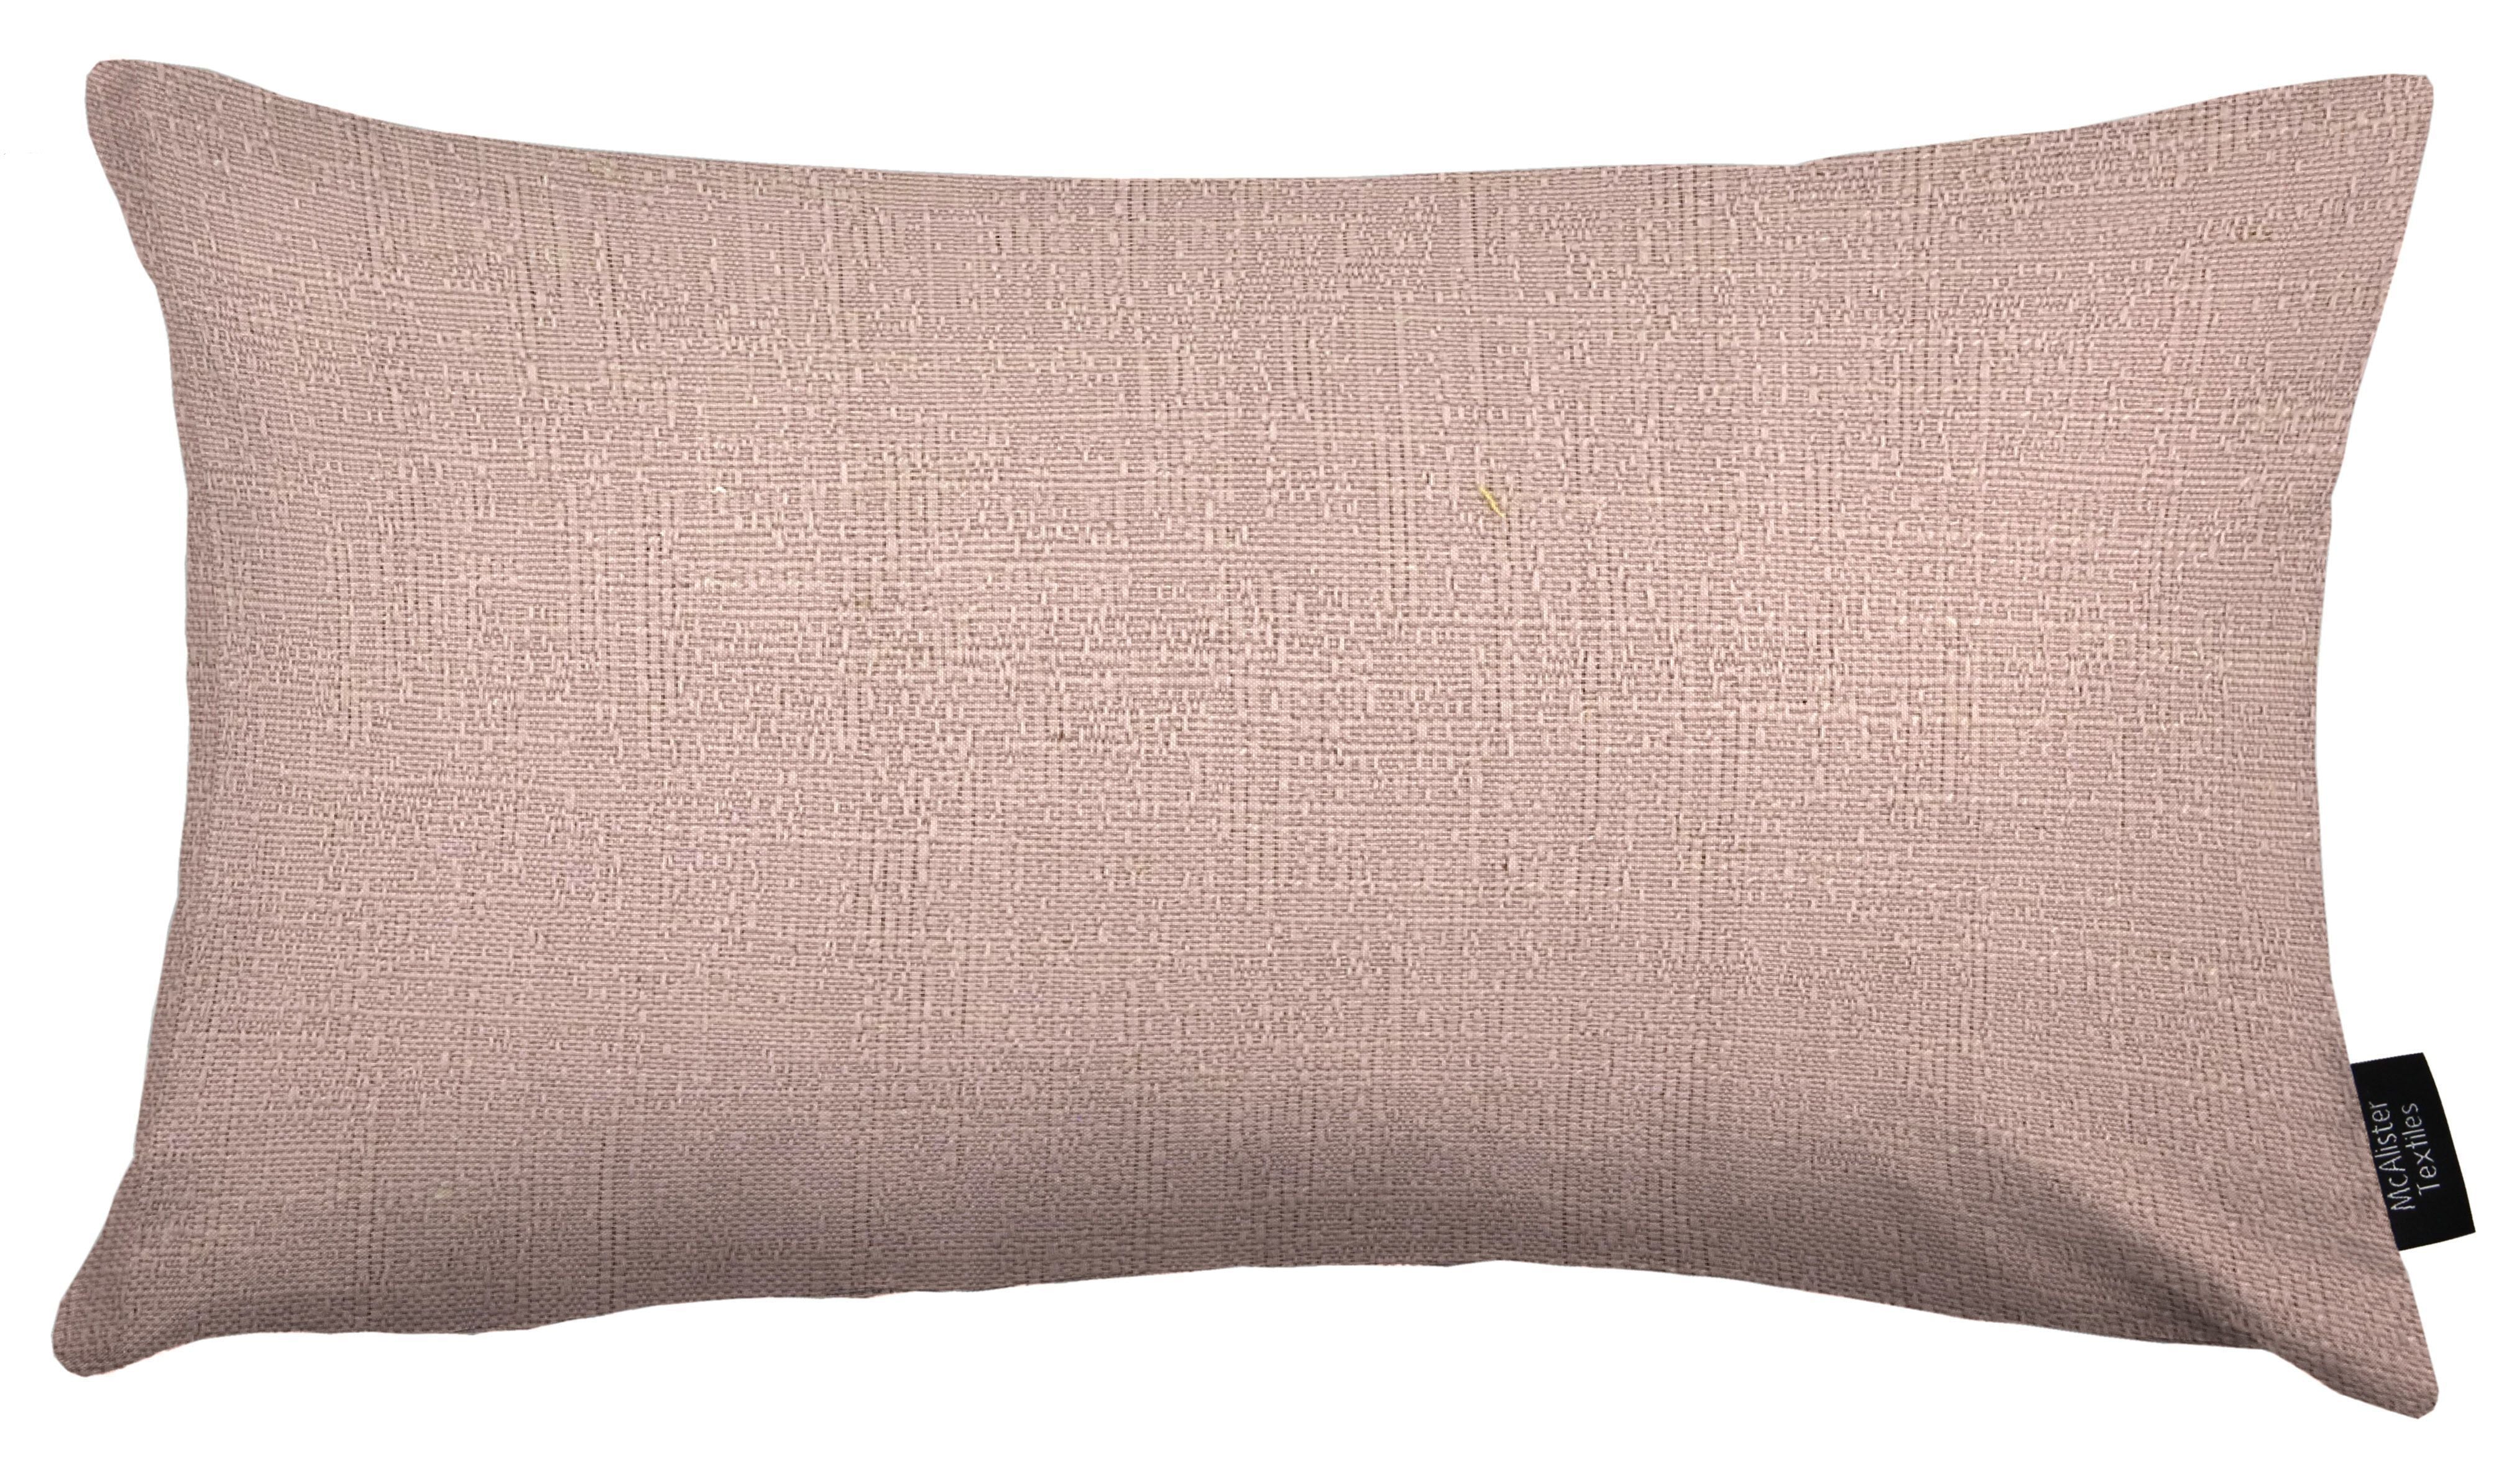 McAlister Textiles Harmony Contrast Soft Blush Plain Cushions Cushions and Covers Cover Only 50cm x 30cm 